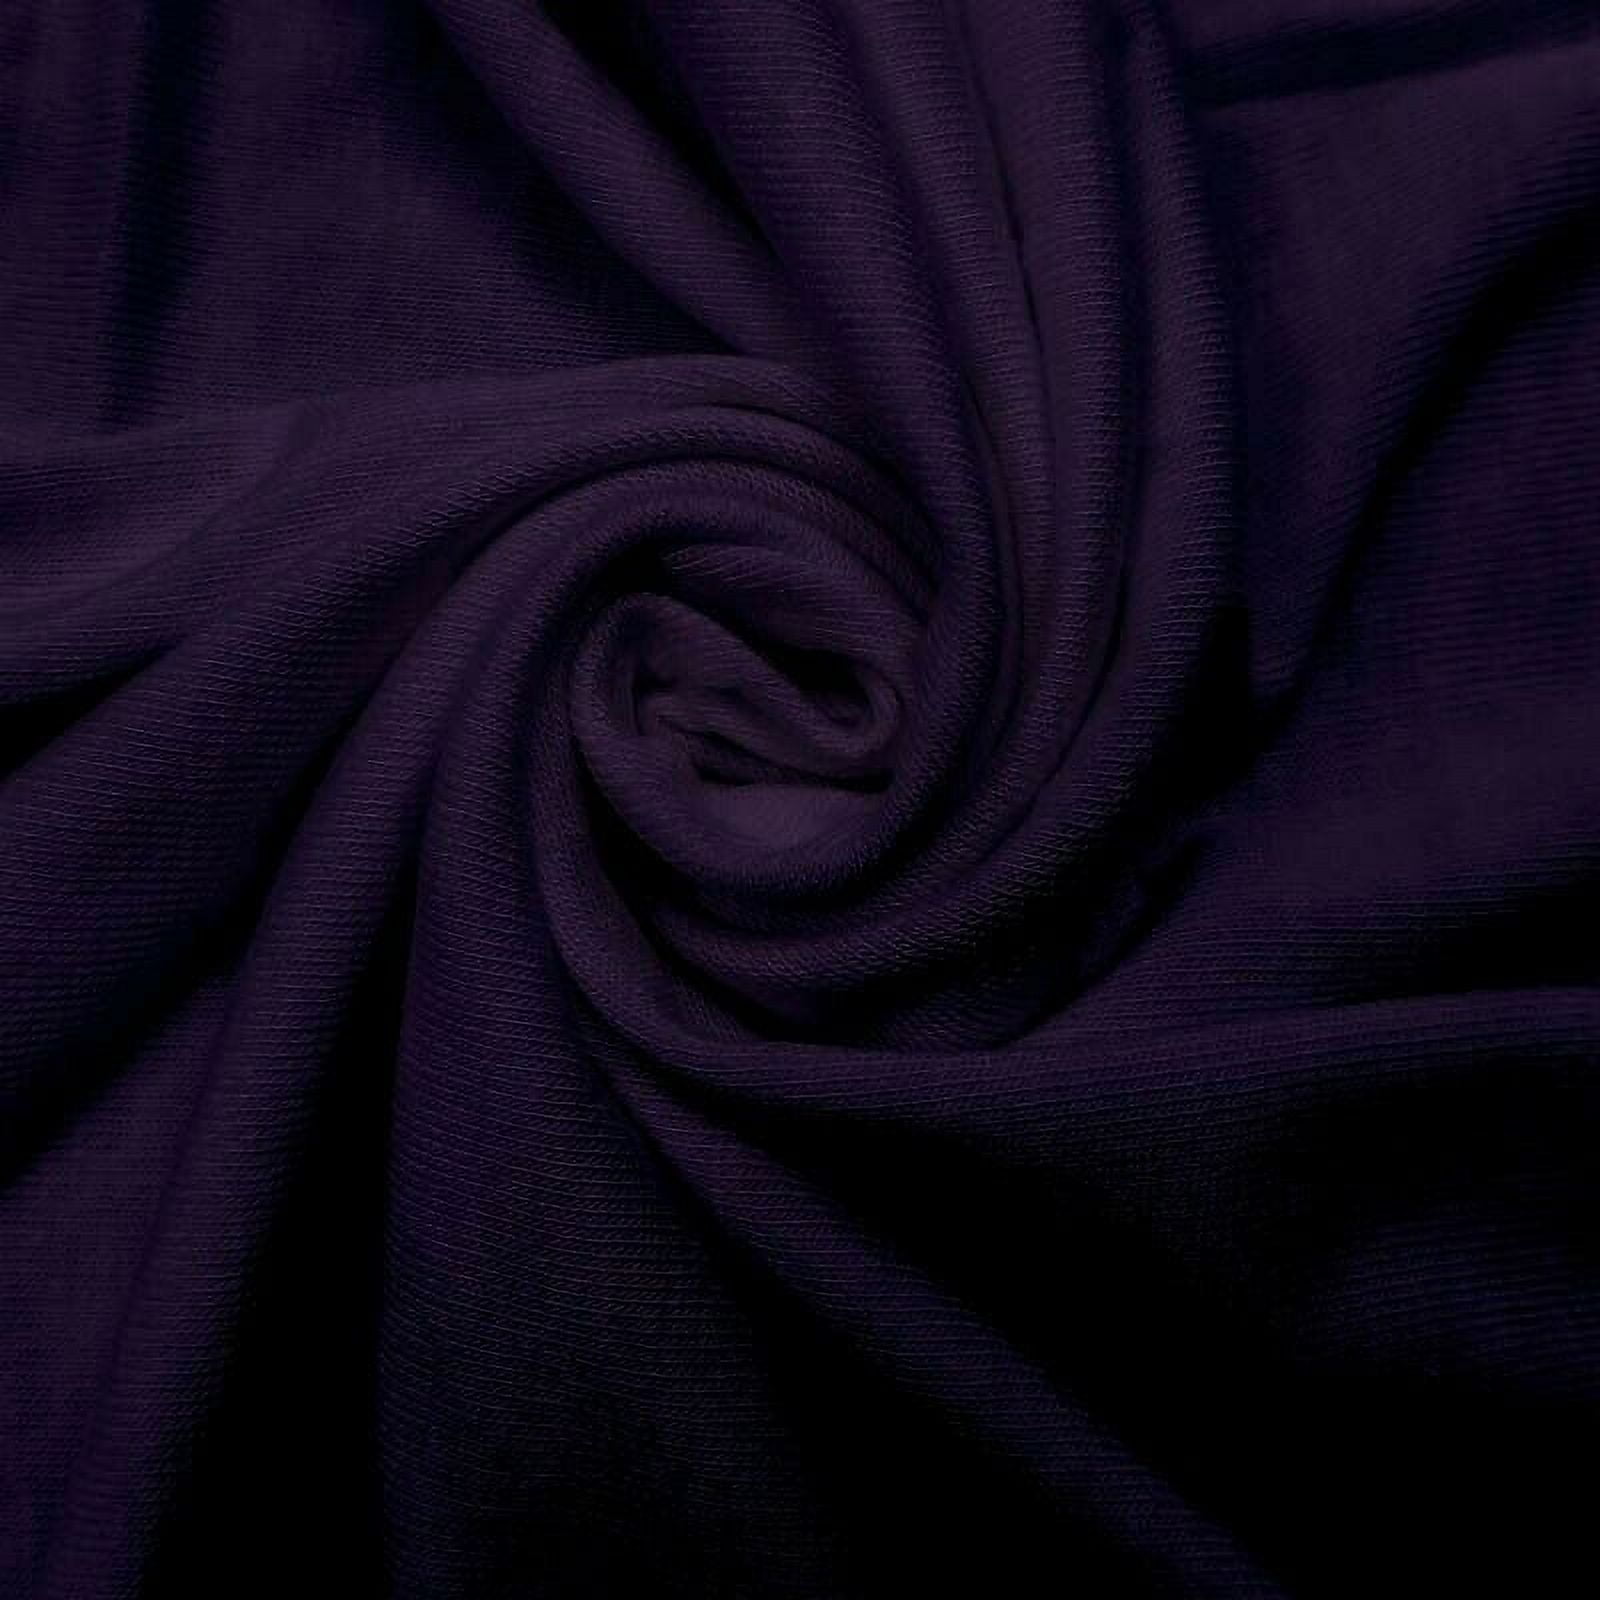 FREE SHIPPING!!! SAMPLE SWATCH Mauve Dusk Rayon Jersey Stretch Knit Fabric  - Medium Weight/ 180 GSM, DIY Projects